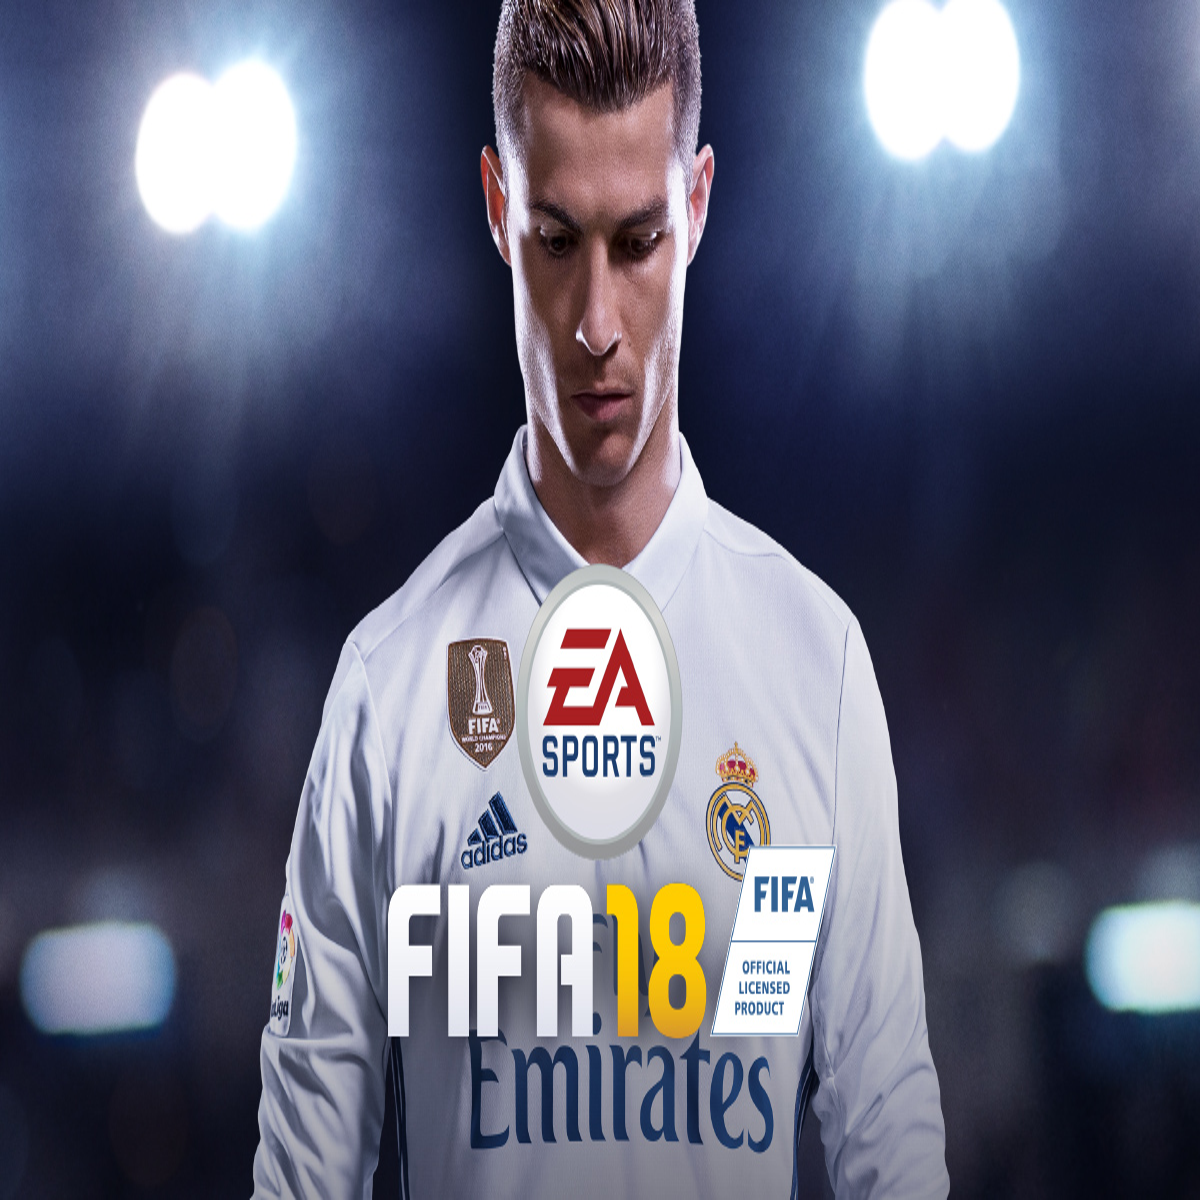 FIFA 18 Ultimate Team: New Icons, Features Revealed in Live Stream